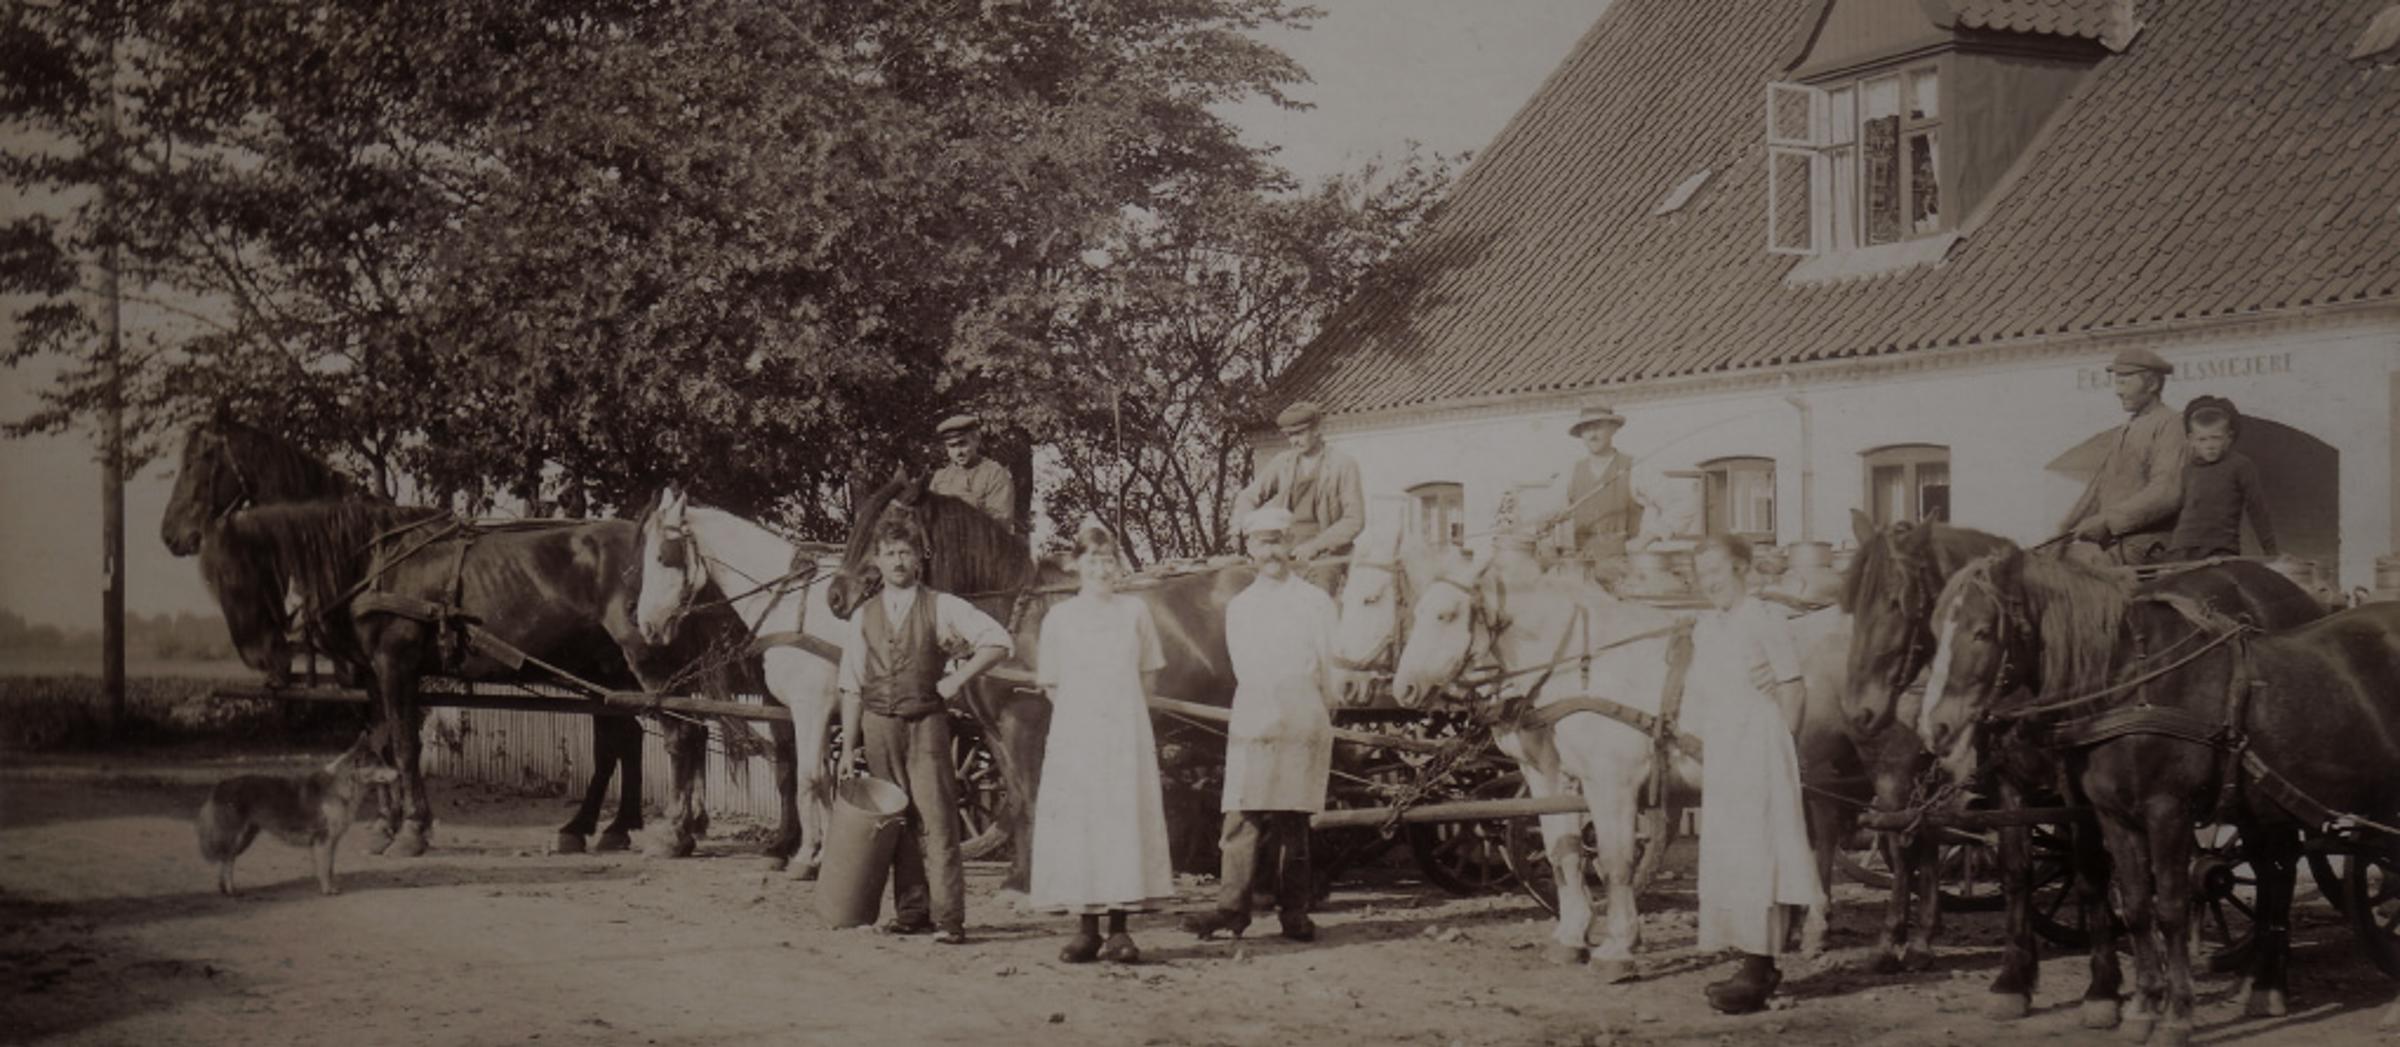 Old black and white image of farmers and horses with carriages